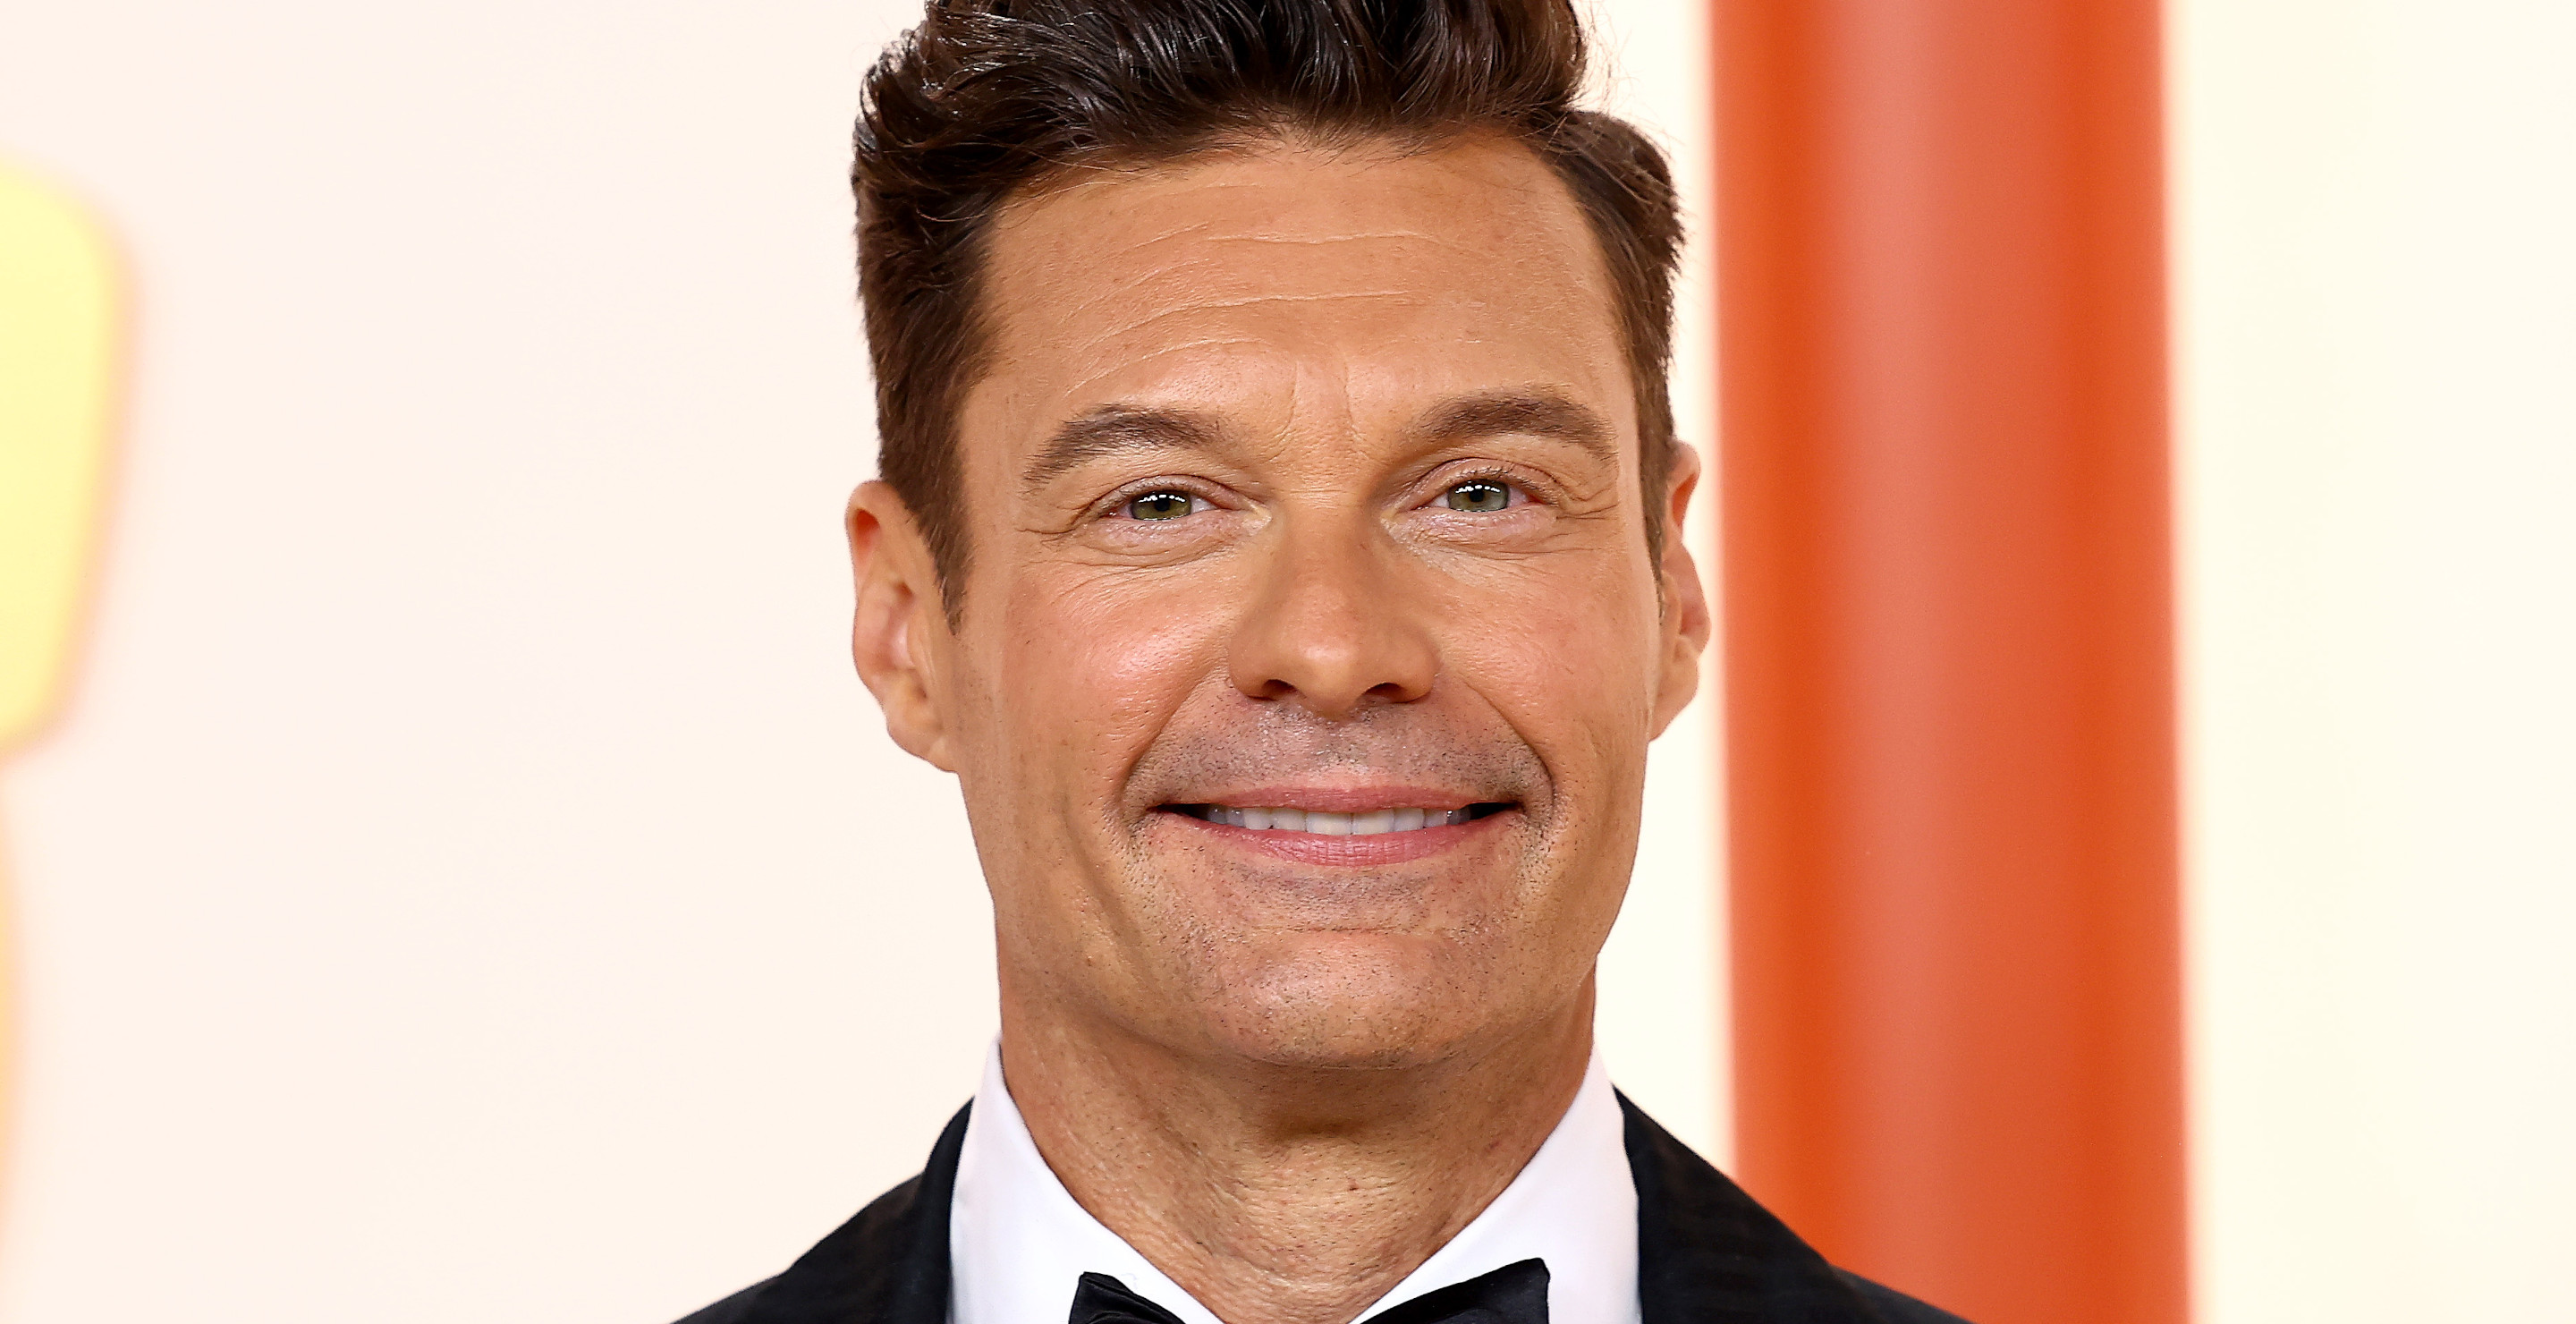 One Music Icon Wants Ryan Seacrest's Spot, Not Katy Perry's, On 'American Idol'